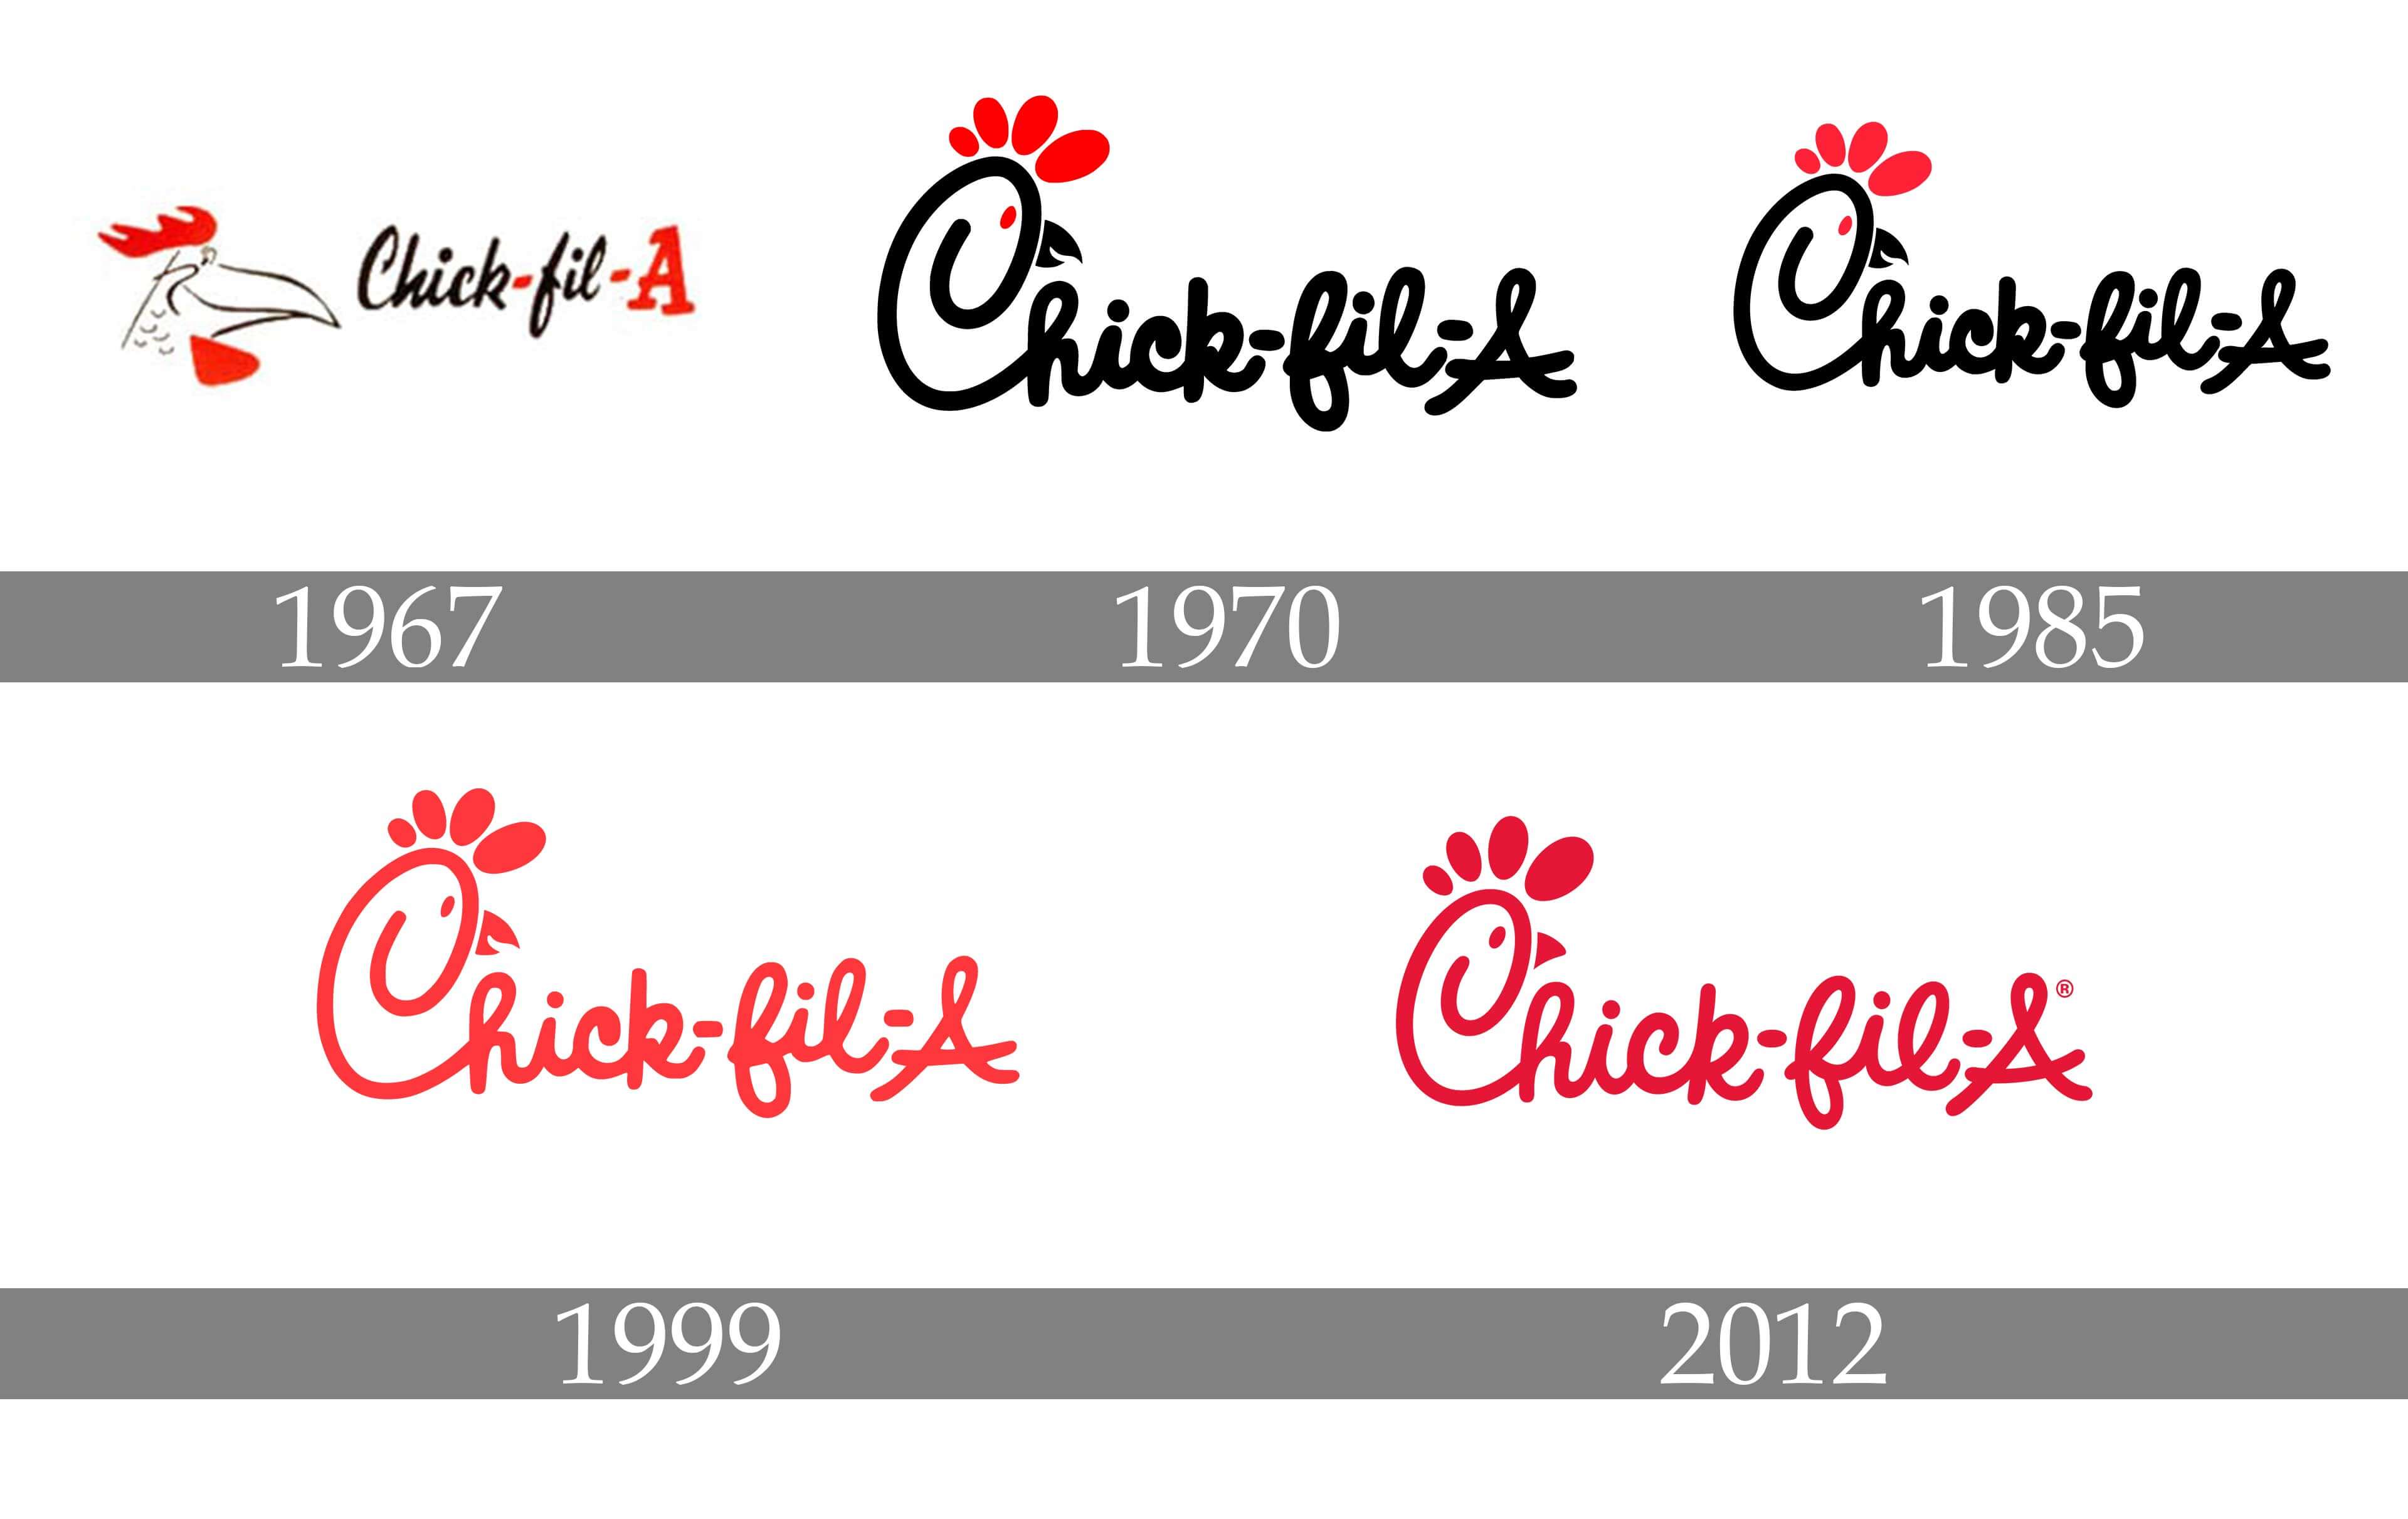 Famous Logos With Hidden Message, Chick-fil-A